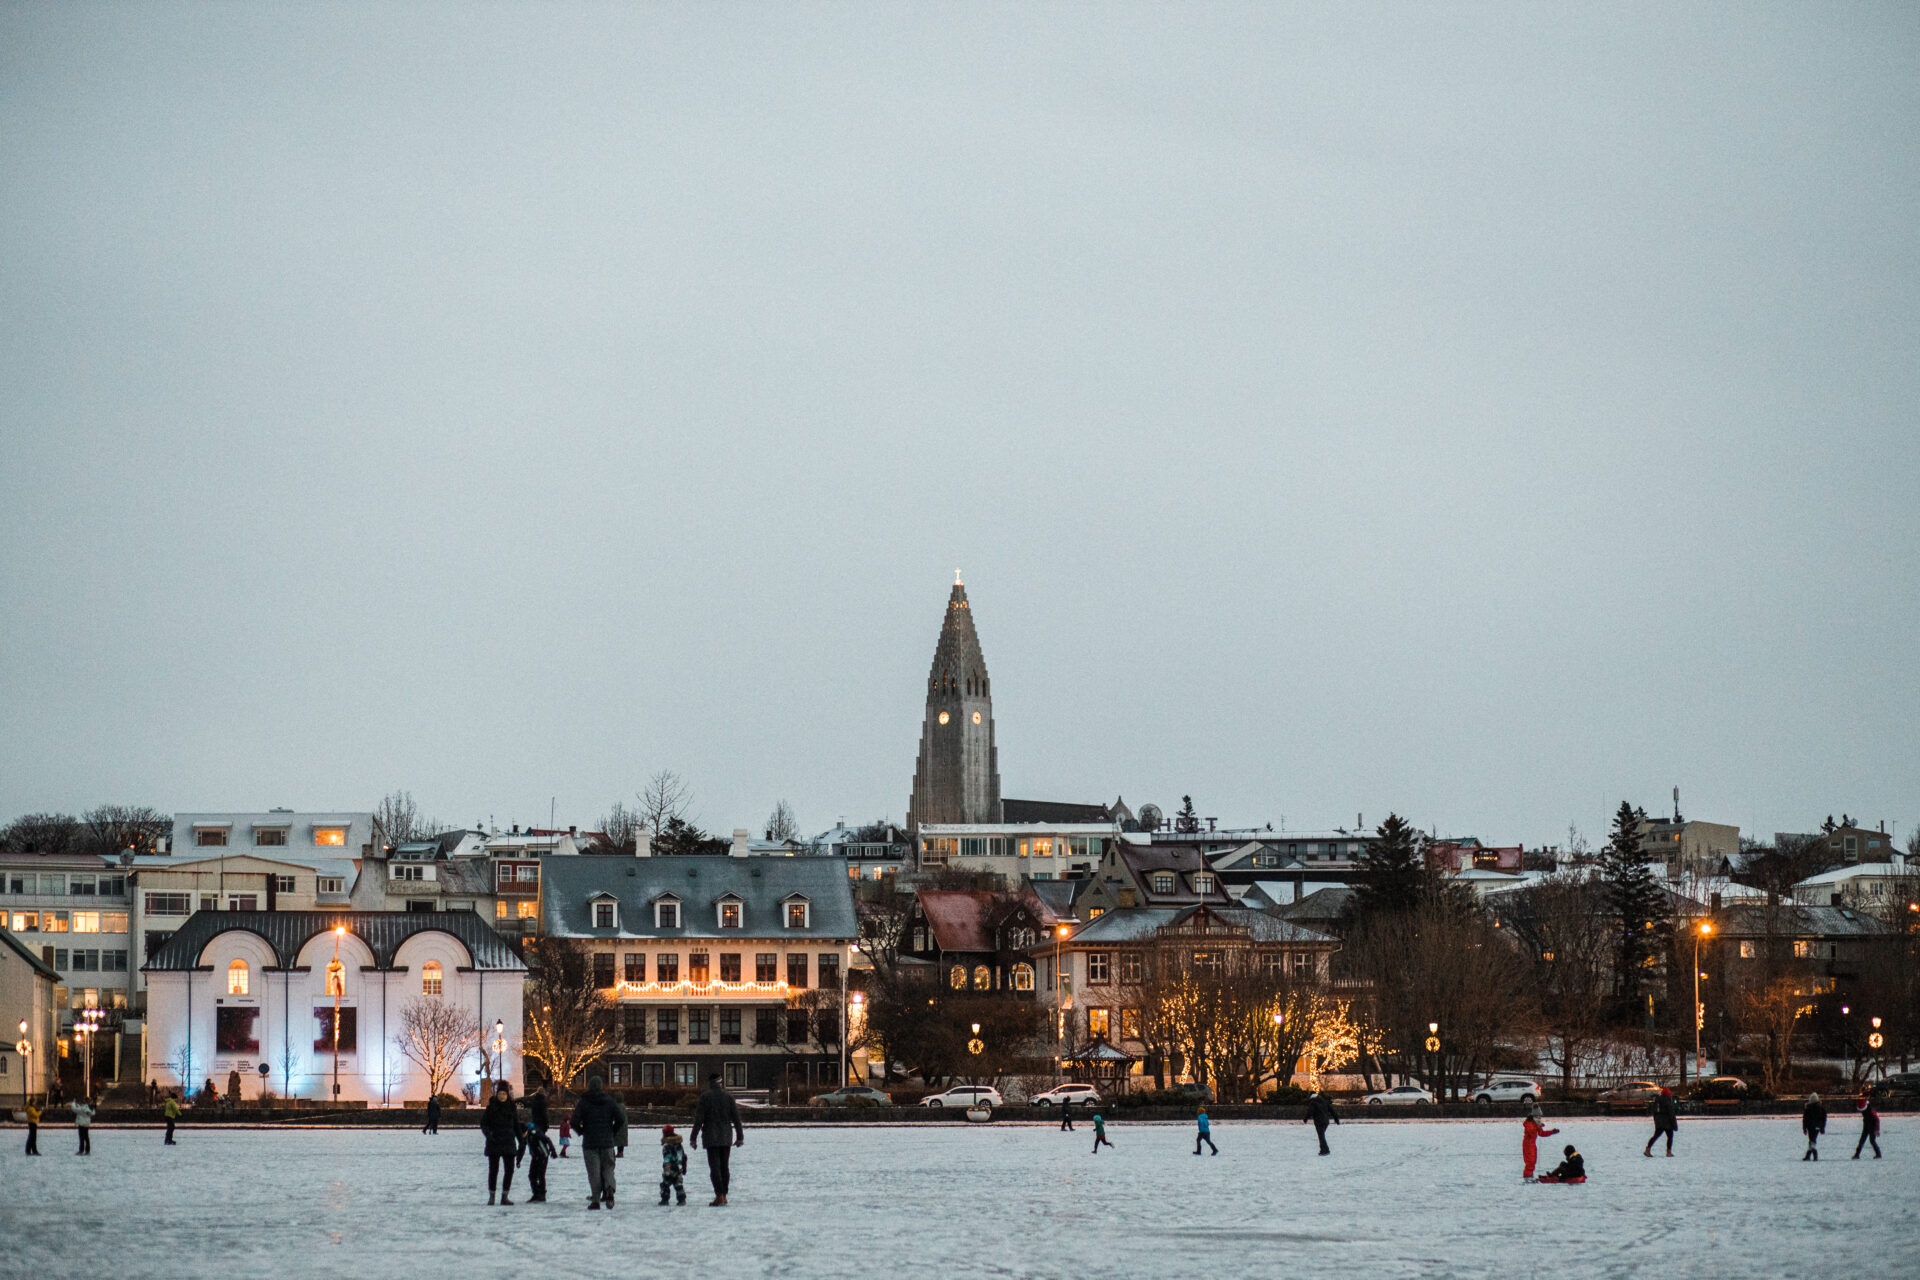 The best Christmas markets in Europe | figures walking across the snow in Reykjavik, Iceland